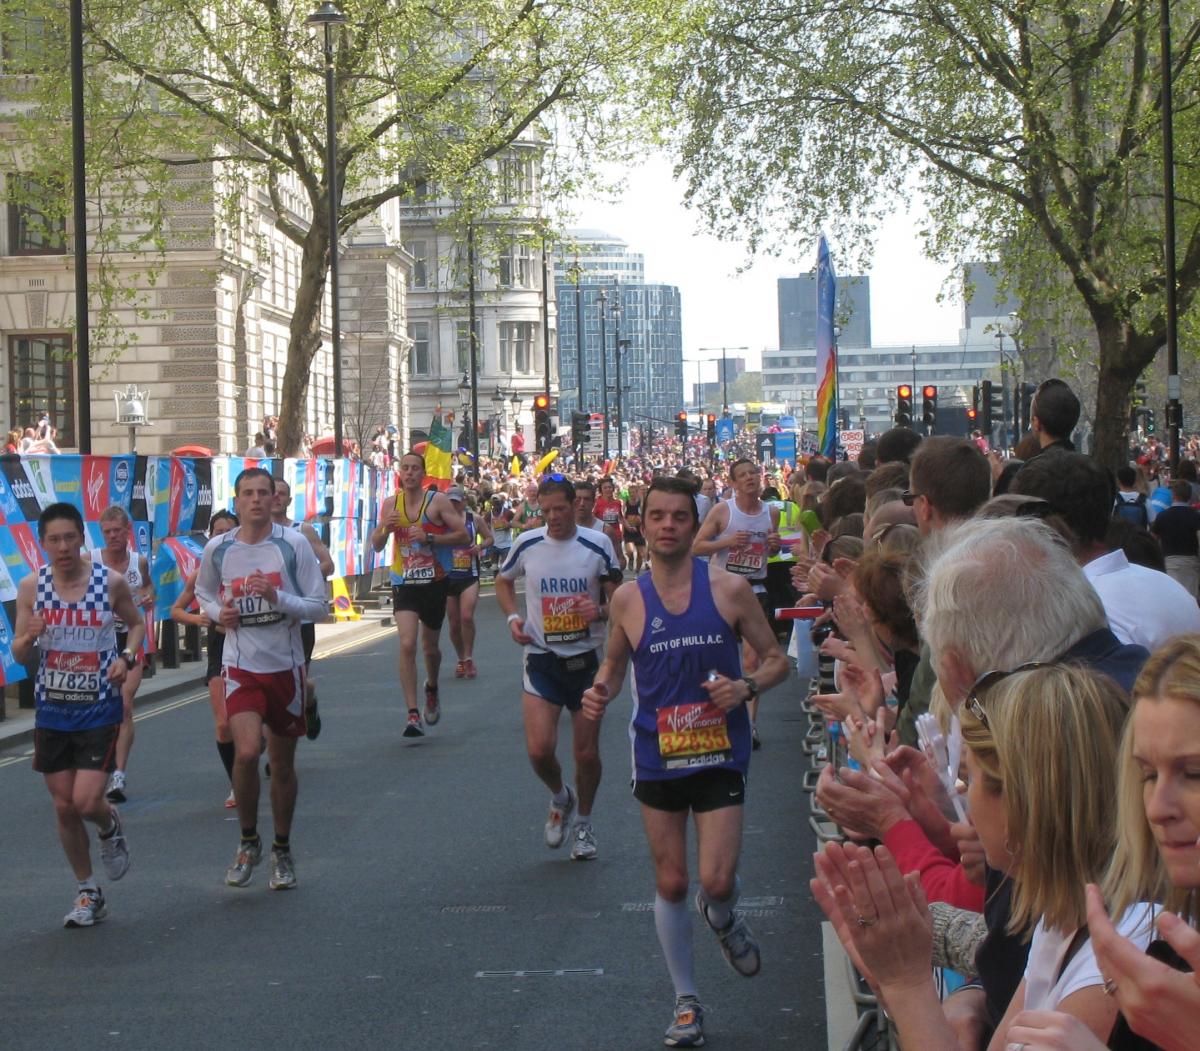 Runners and crowds at the London Marathon